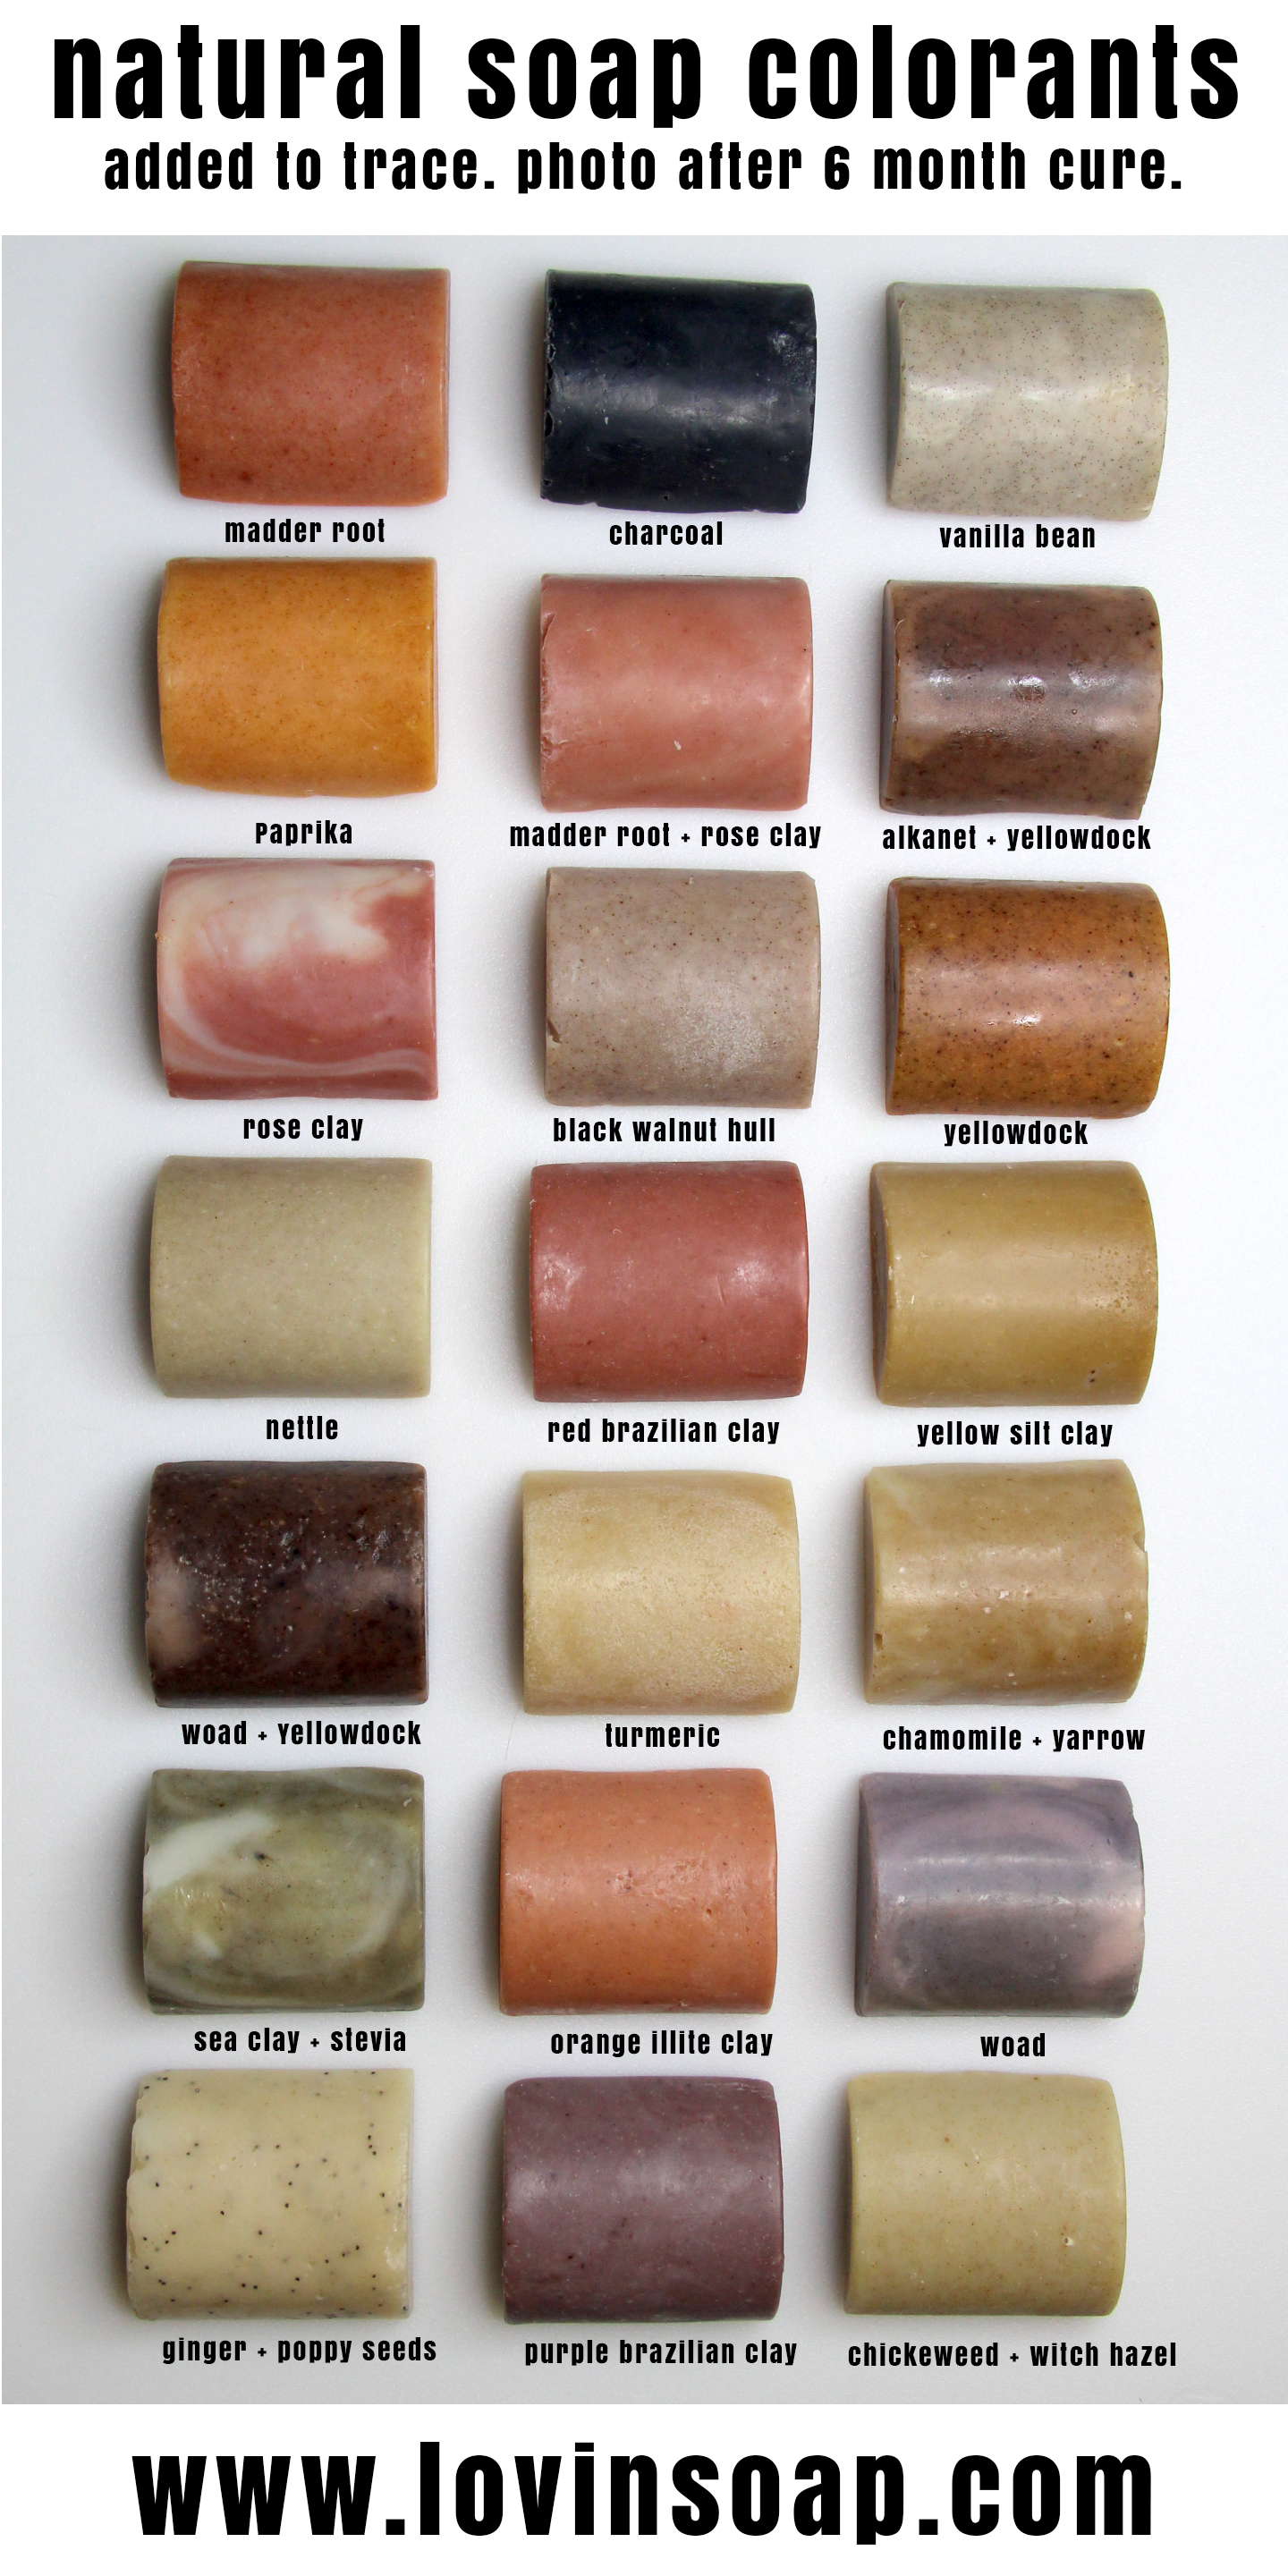 How Long Will Natural Colors Last in Homemade Soap?